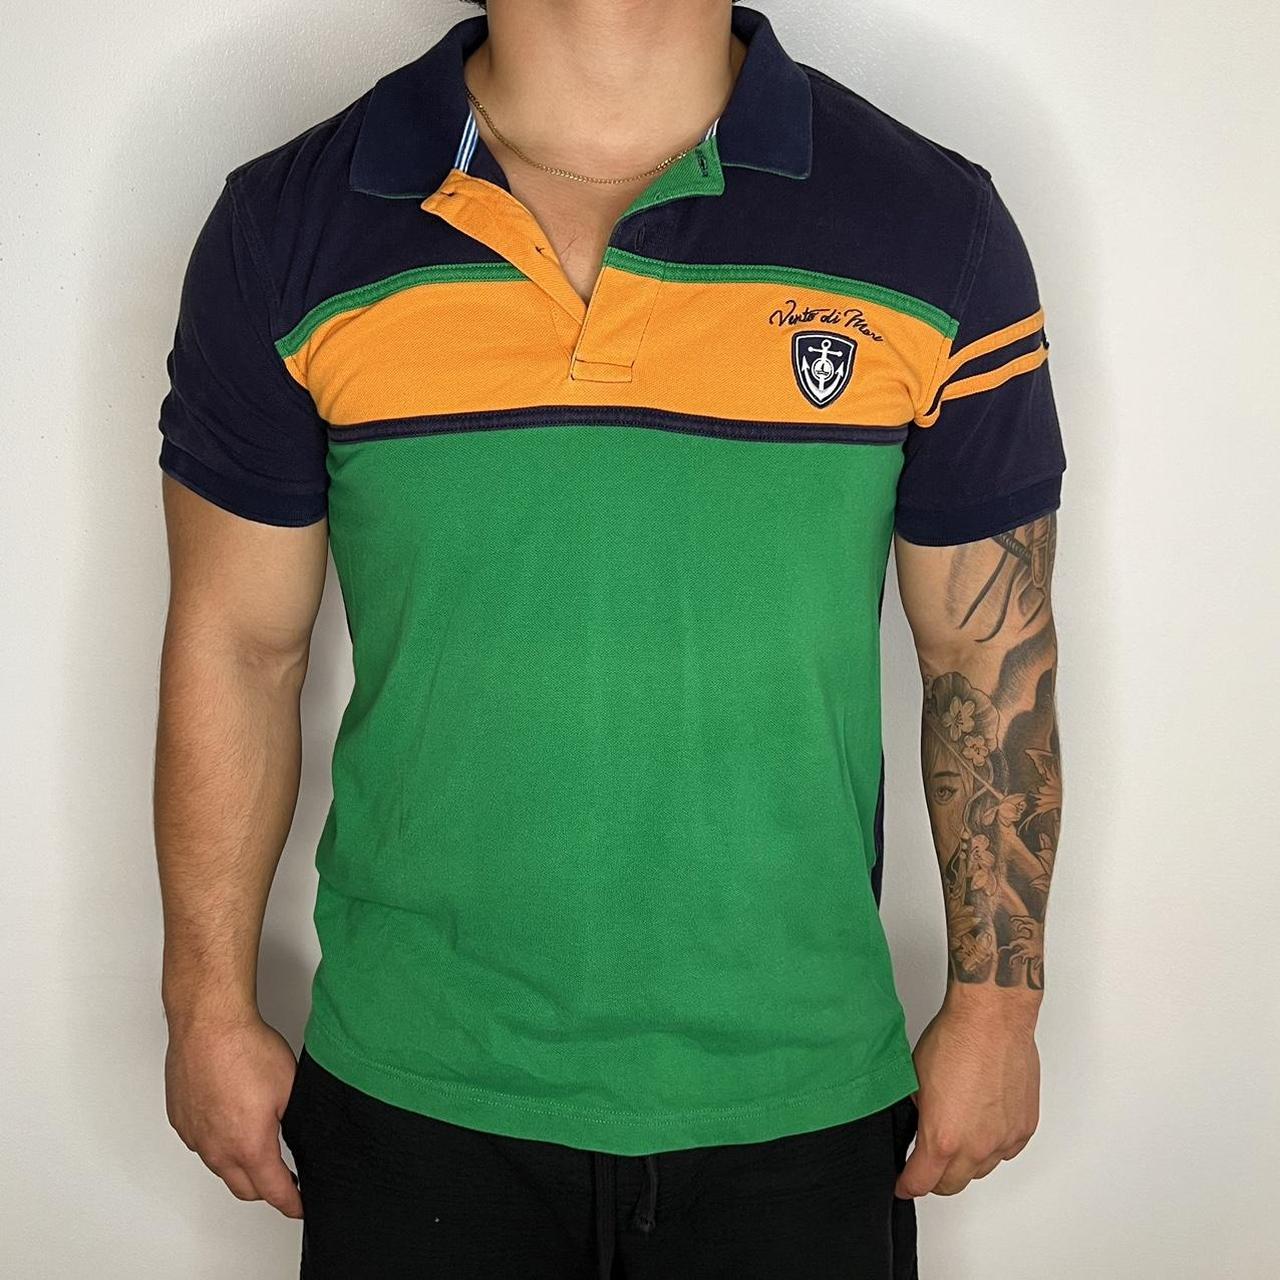 Navigare polo (Please read below) -size: L,... -